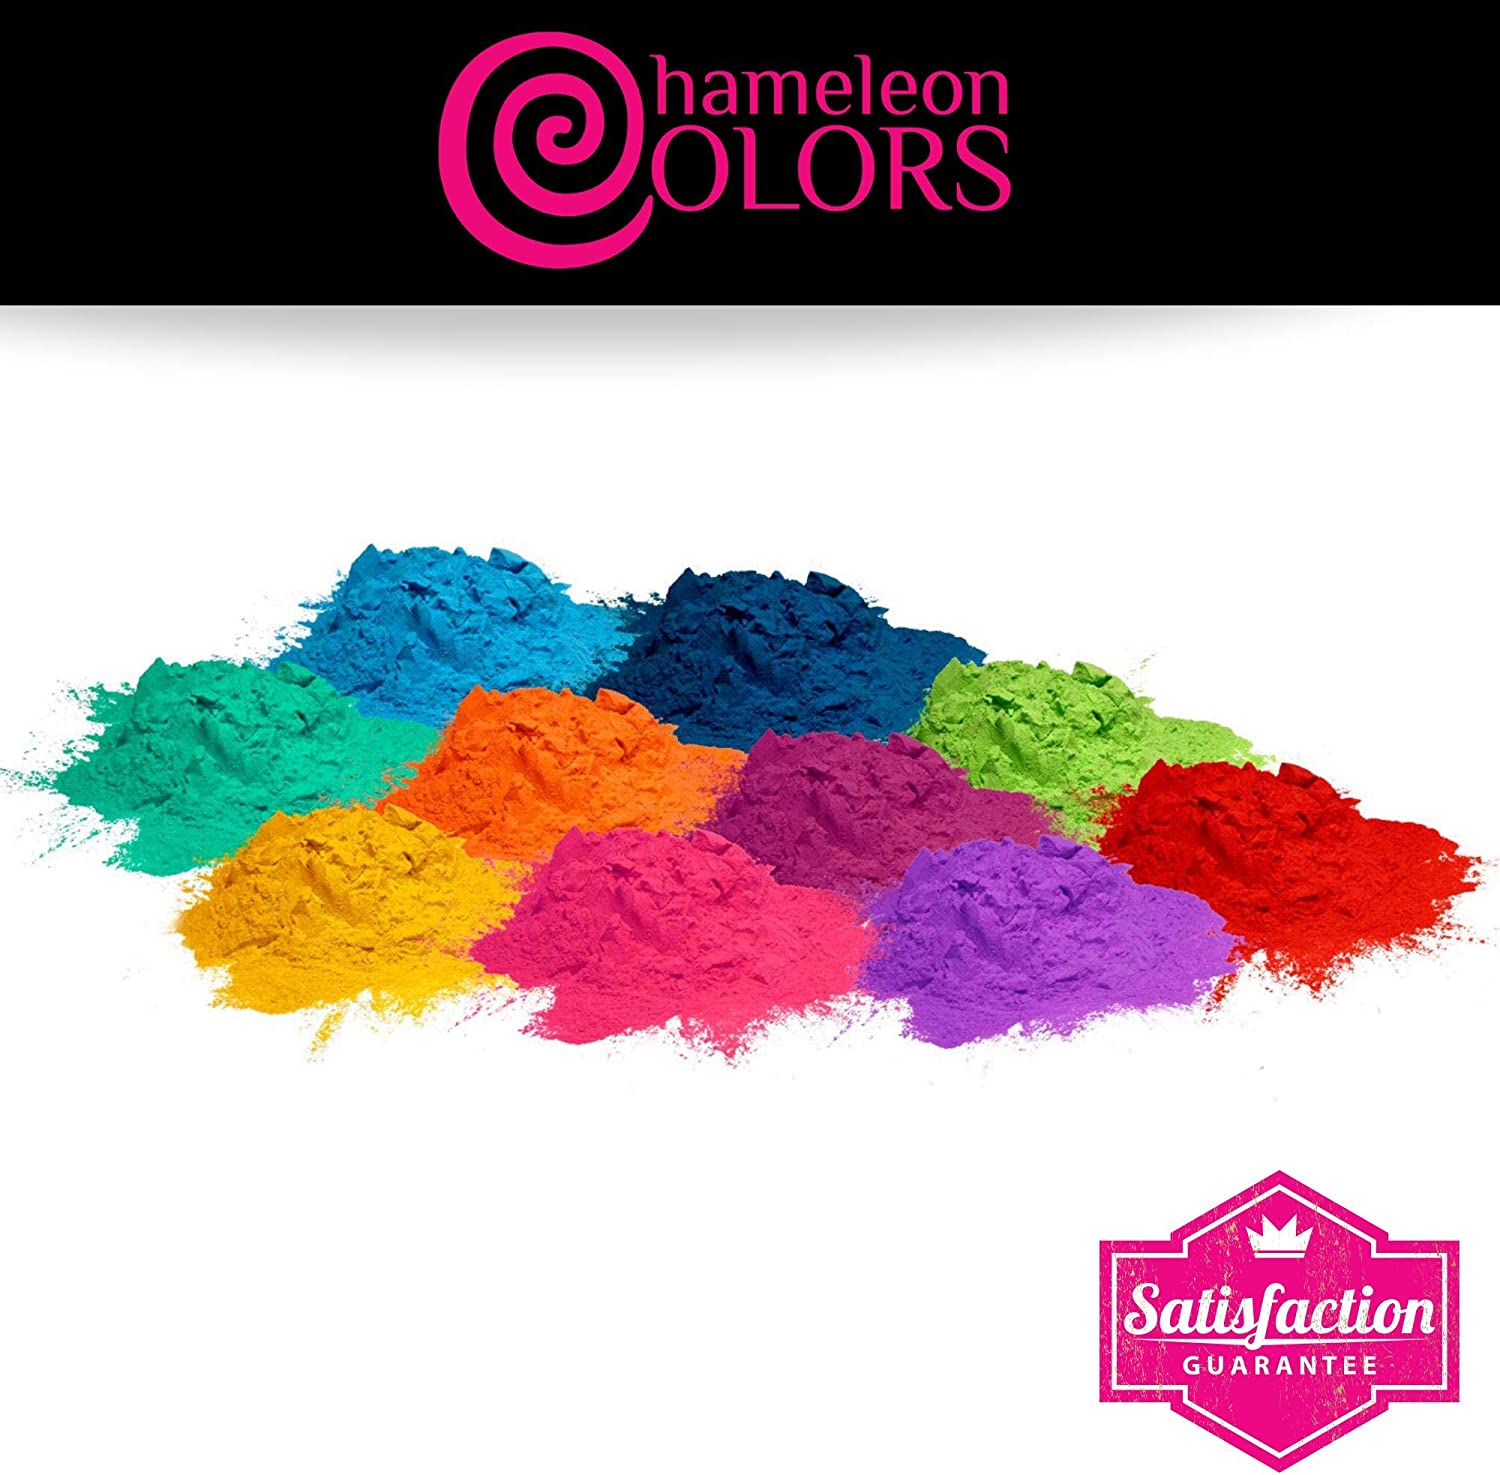 Color Powder 70 Gram Individual Packets by Chameleon Colors, 10 Pack Plus Bonus White, Perfect for 3-5 People, Red, Yellow, Blue, Orange, Purple, Pink, Navy, Magenta, Aquamarine, and Green Powder